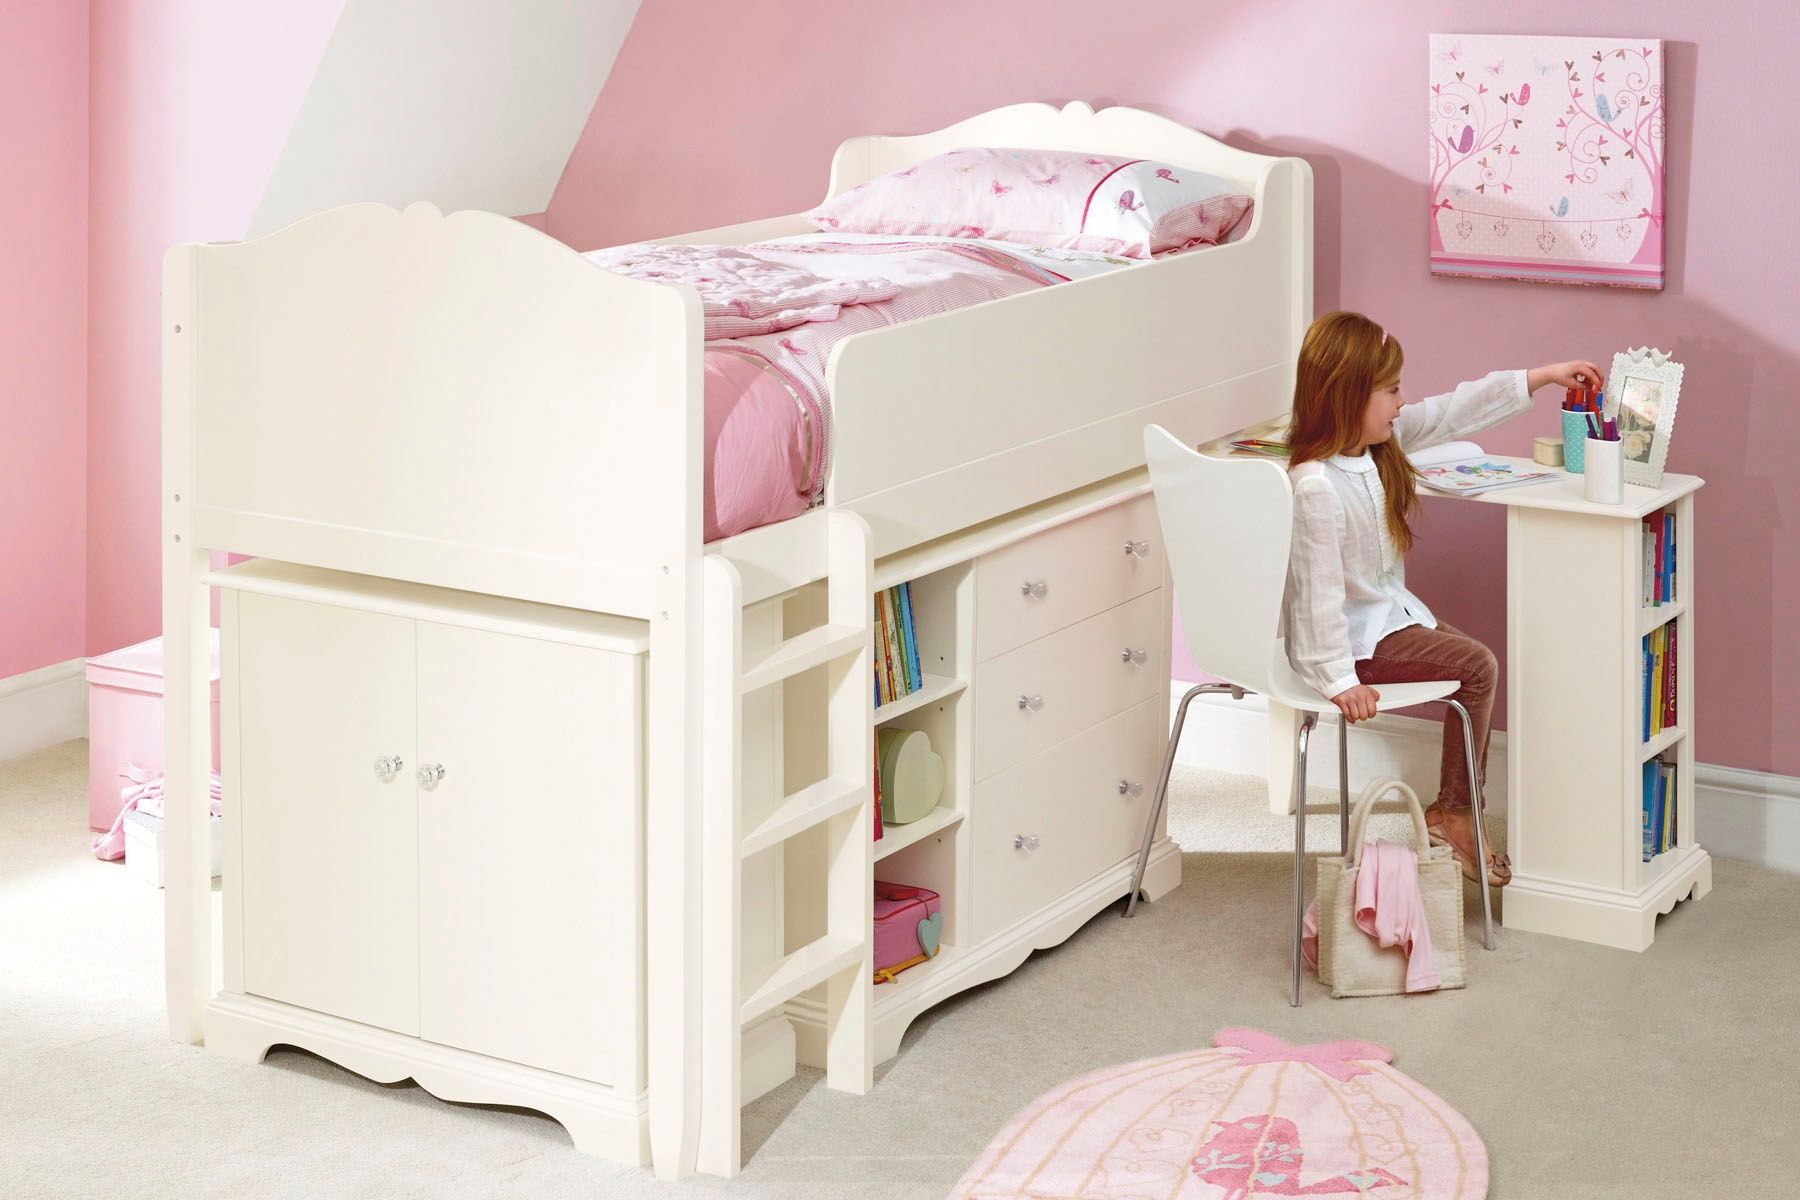 version of the bright style of a nursery for a girl